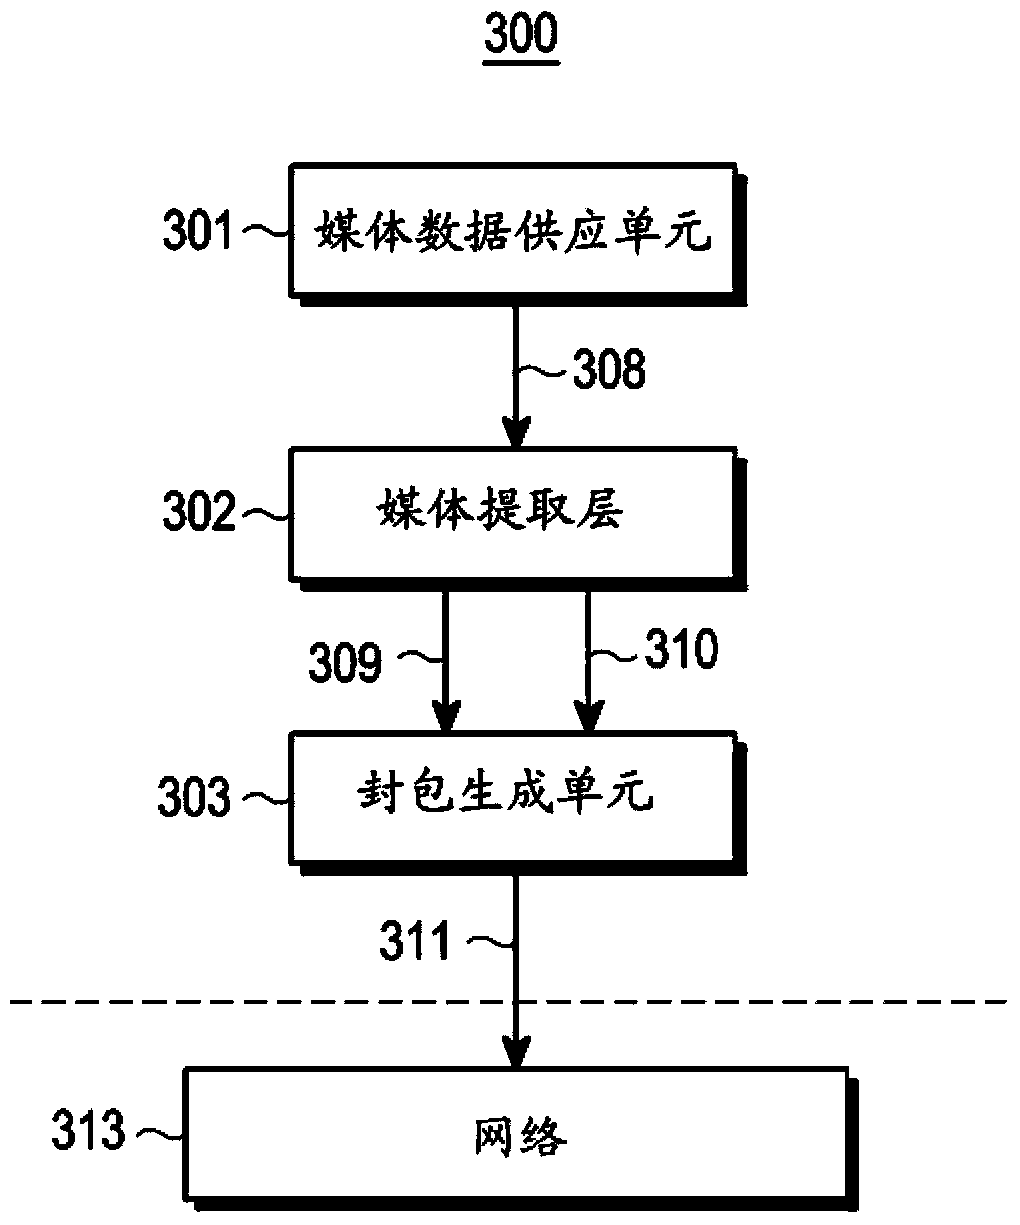 Method and apparatus for transmitting a multimedia data packet